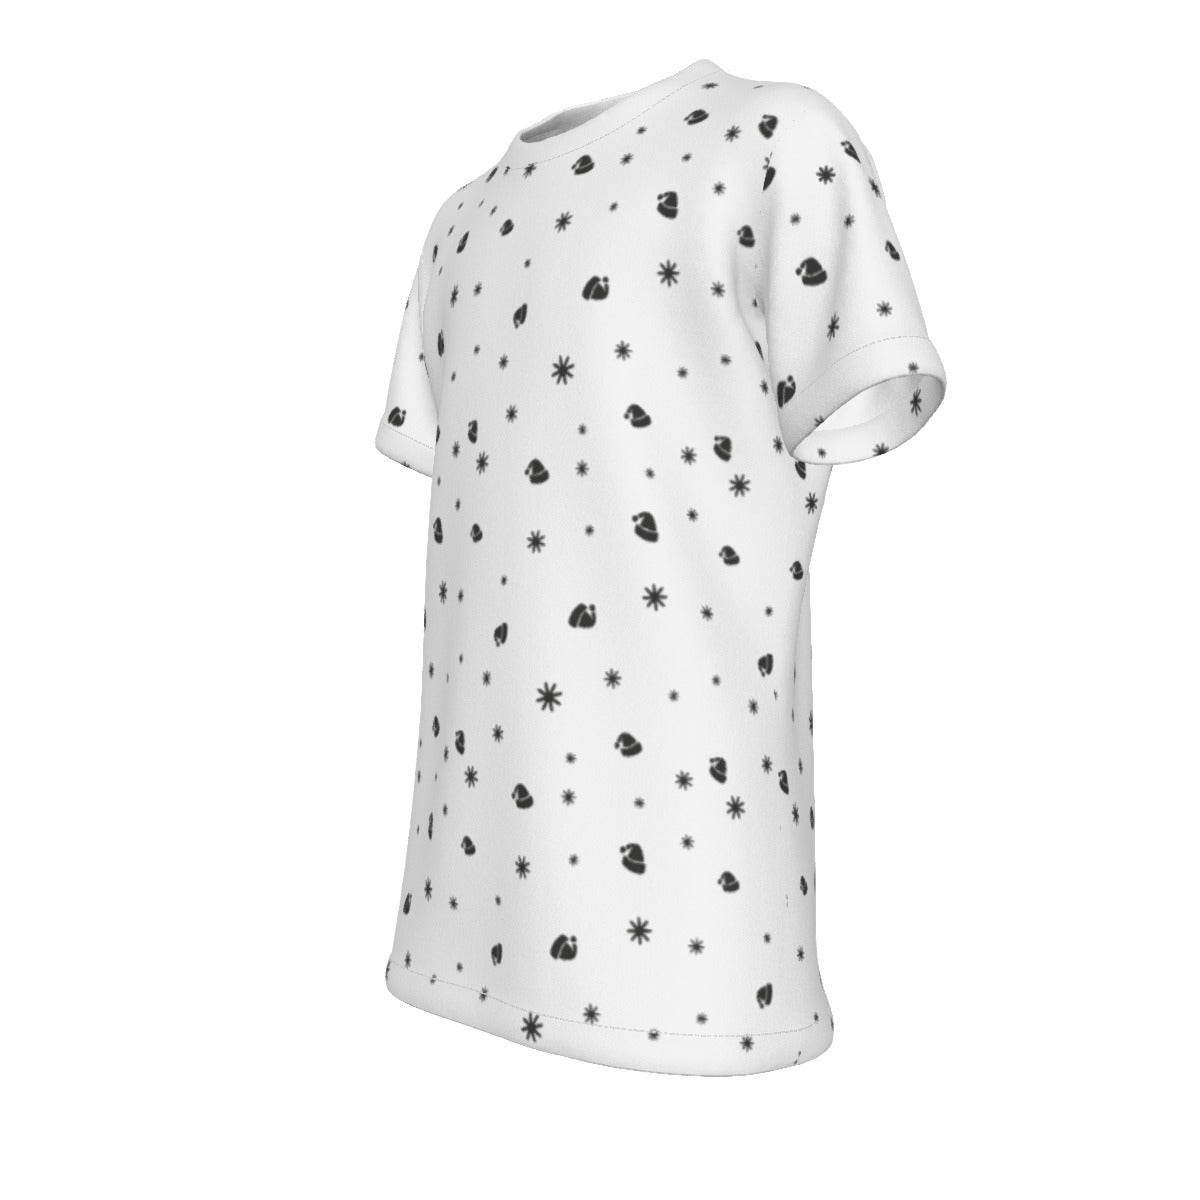 Kid's Christmas T-Shirt - Snowflakes and Hats - Festive Style